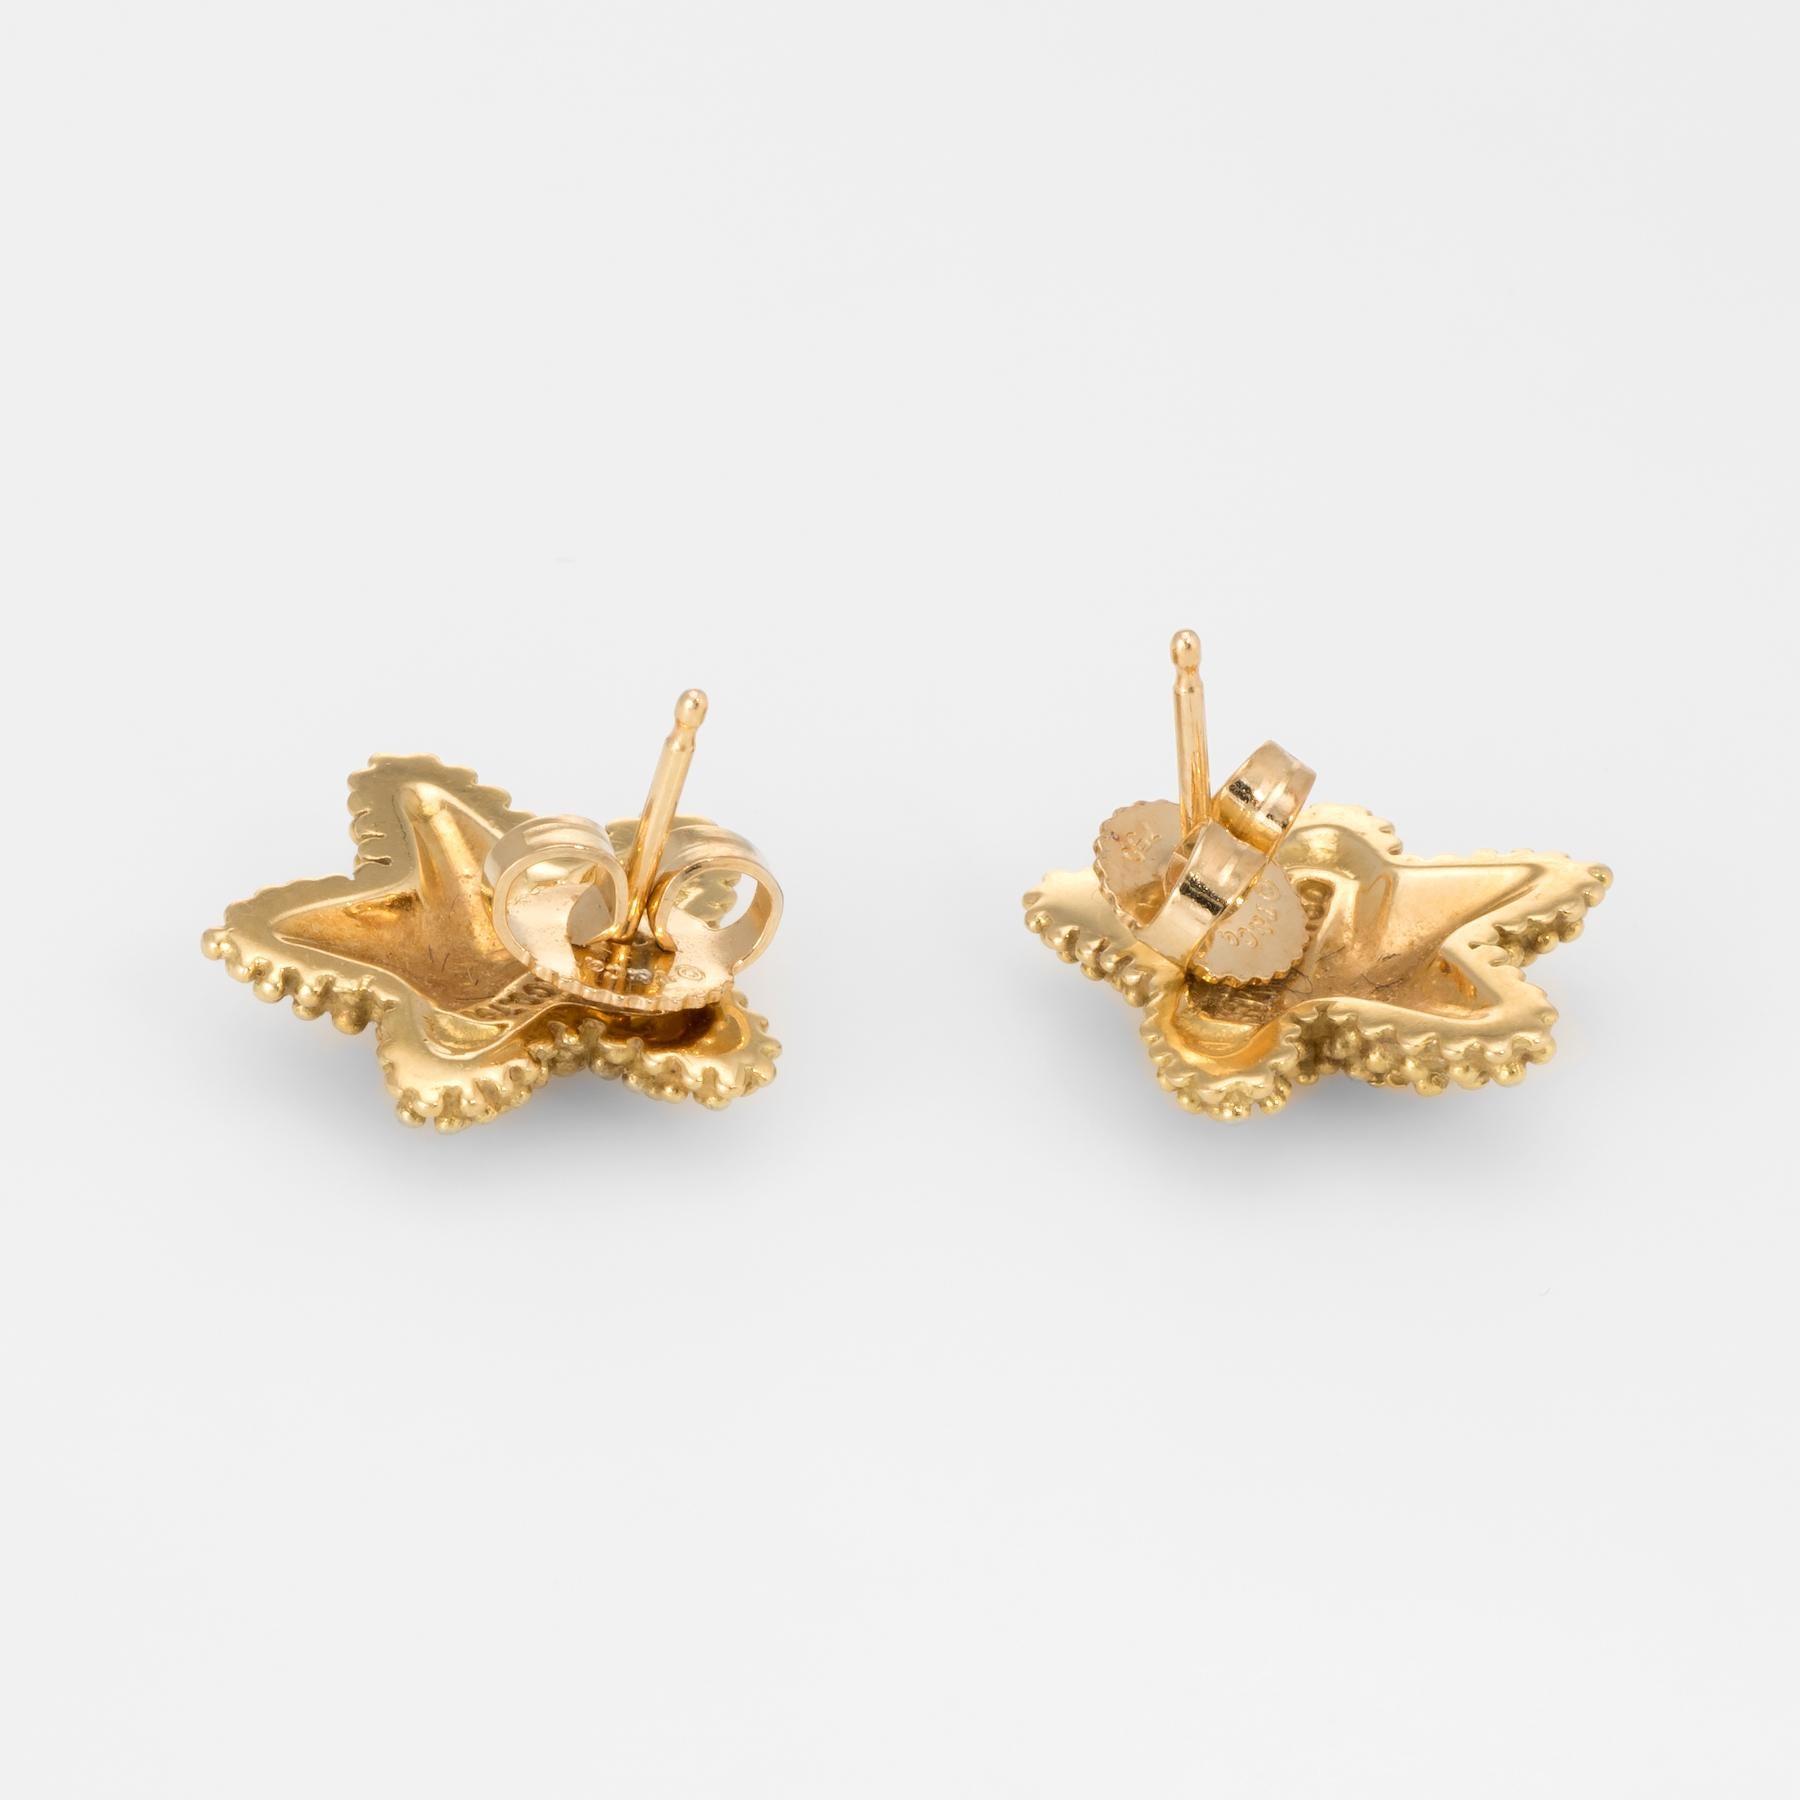 Elegant pair of Tiffany & Co starfish earrings, crafted in 18k yellow gold. 

Lifelike textured design, a hallmark of Tiffany craftsmanship.  

Tiffany & Co navy blue presentation box also included. 

The earrings are in excellent original